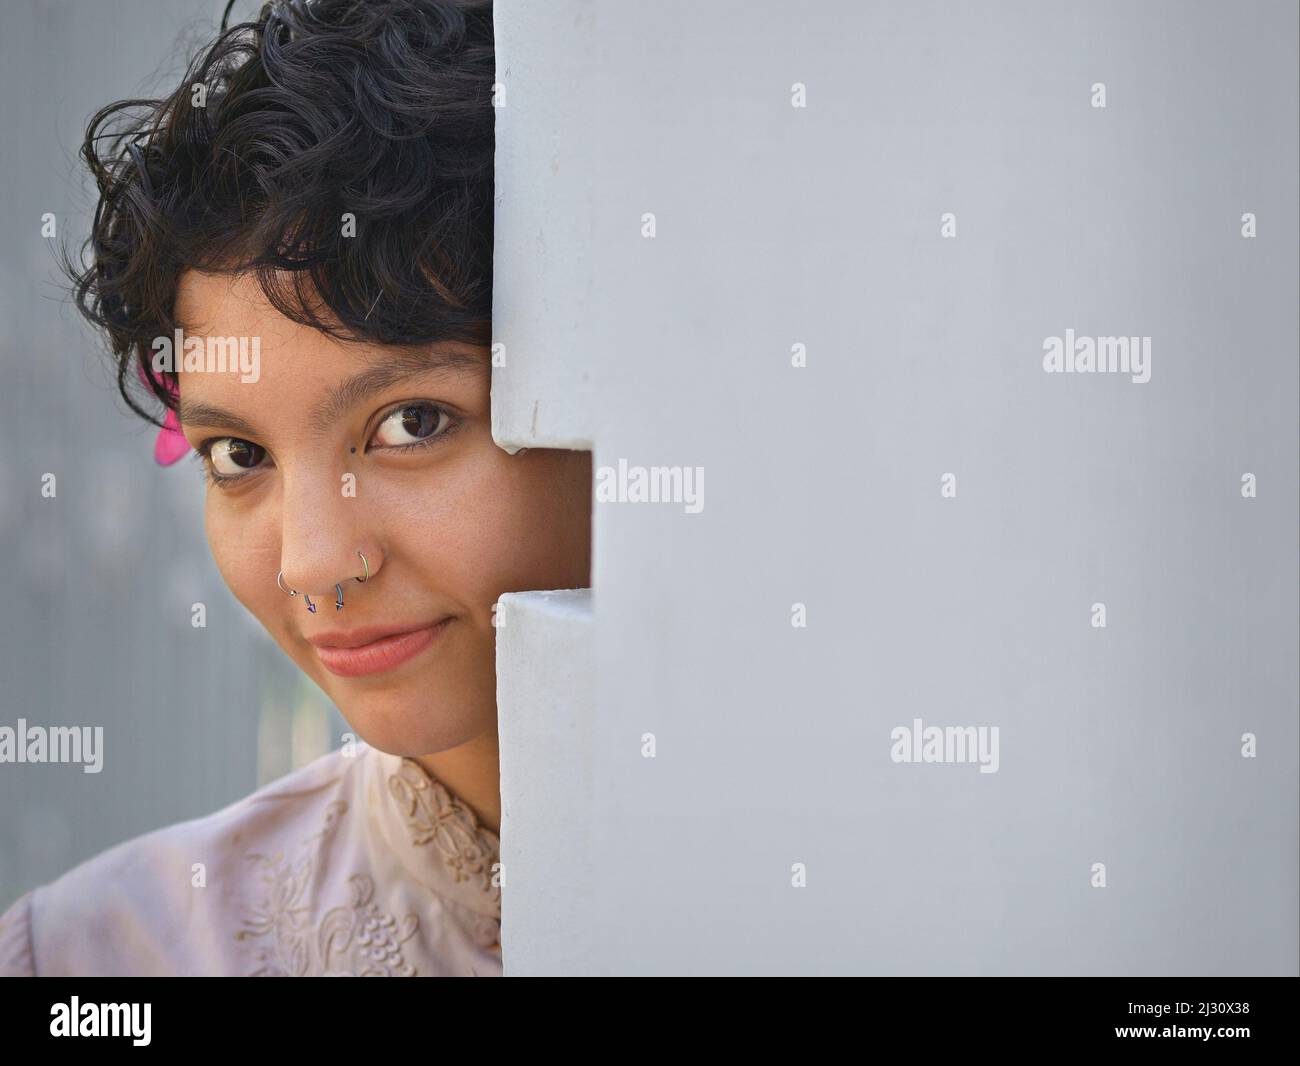 Shy pretty young Latina woman with beautiful big brown eyes and short curly hair looks cautiously around a corner towards the viewer. Stock Photo